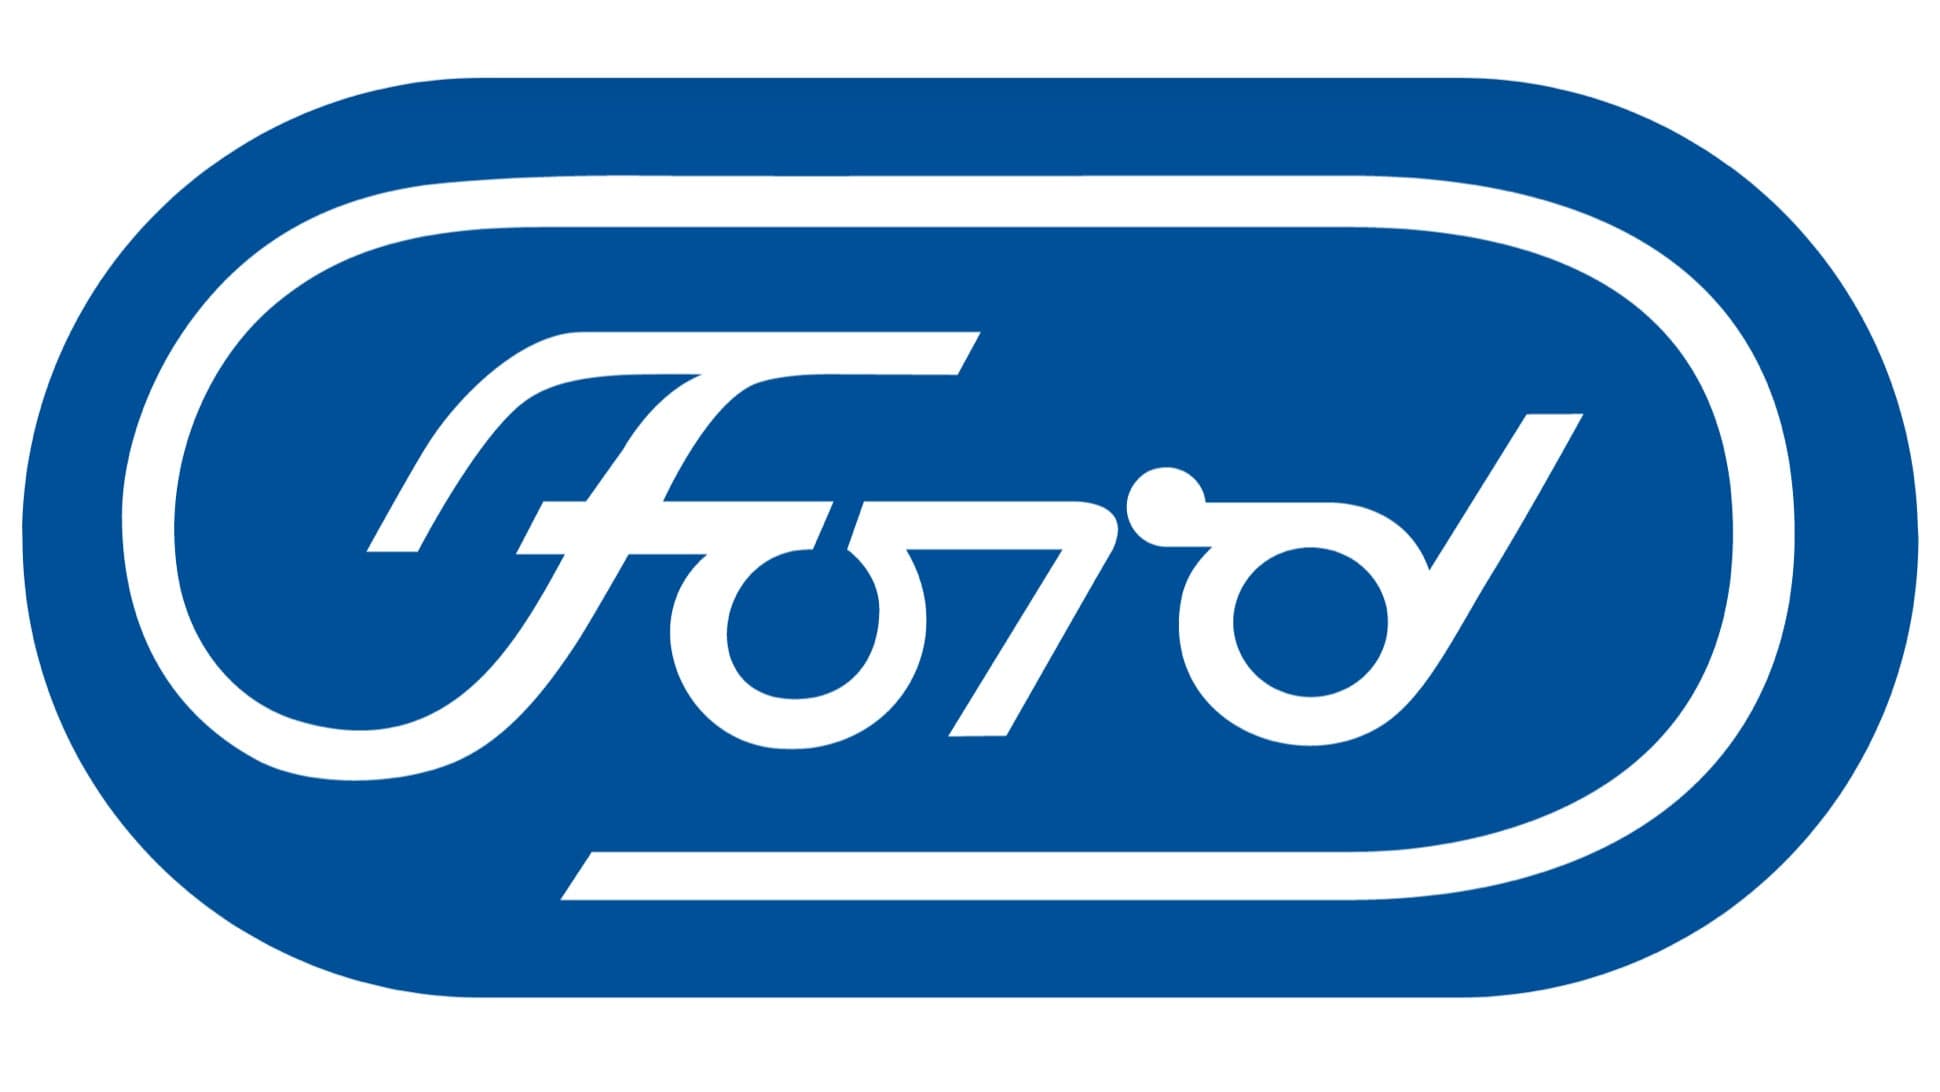 Ford Almost Let a Graphic Design Legend Update Its Blue Oval Logo in 1966